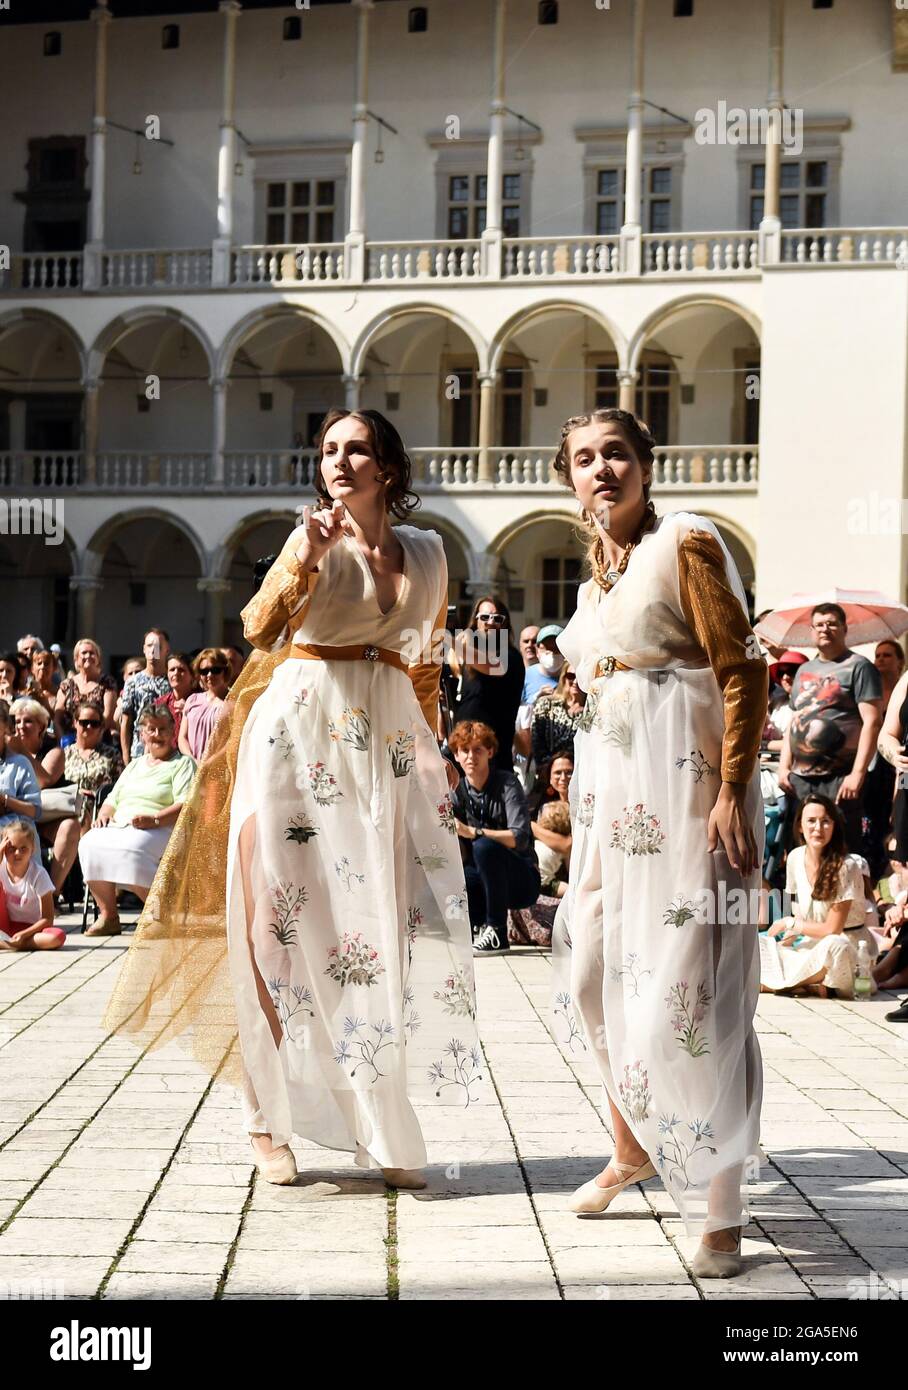 Performers dancing on stage during the fashion show.Dancers from the Terpsichore Dance Theatre and actors from Nomina Rosae Teatr presented a reconstruction of Renaissance fashion in the courtyard of the Wawel Royal Castle in Krakow. Stock Photo